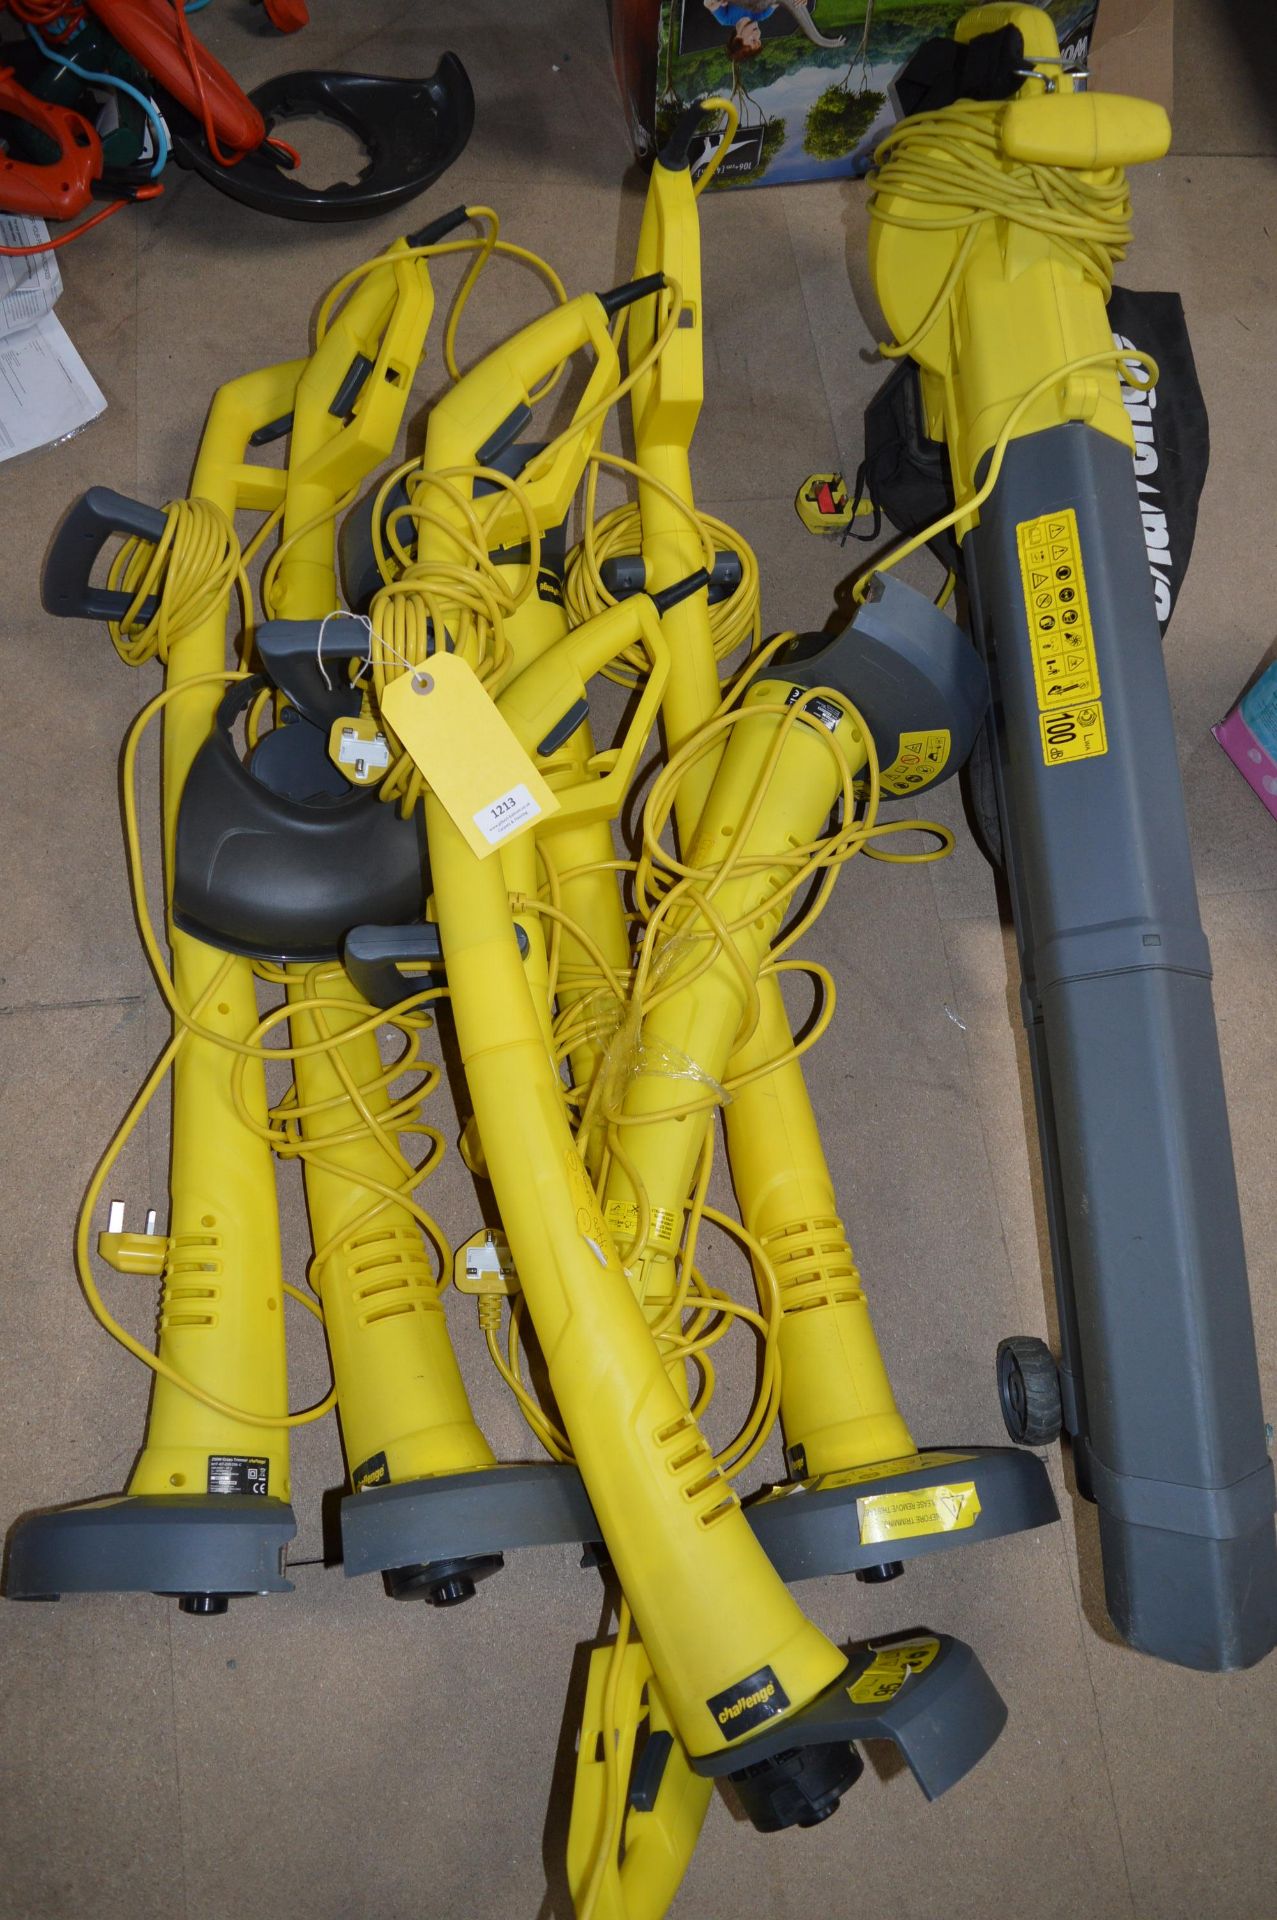 Quantity of Challenge Strimmers and One Blower